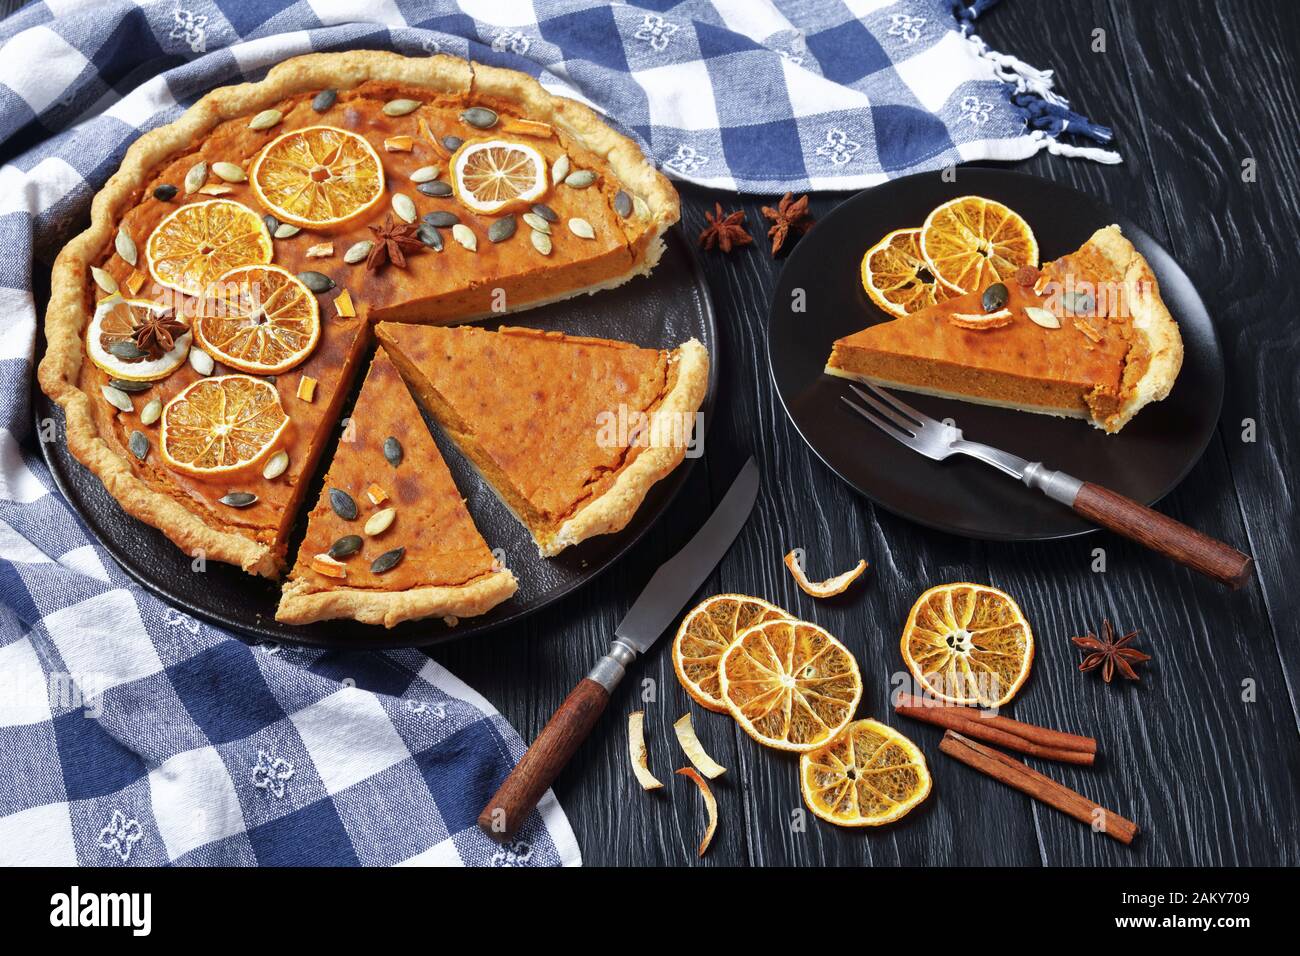 sliced Sweet potato pie decorated with orange chips, pumpkin seeds and anise stars on a black wooden table, horizontal view from above Stock Photo